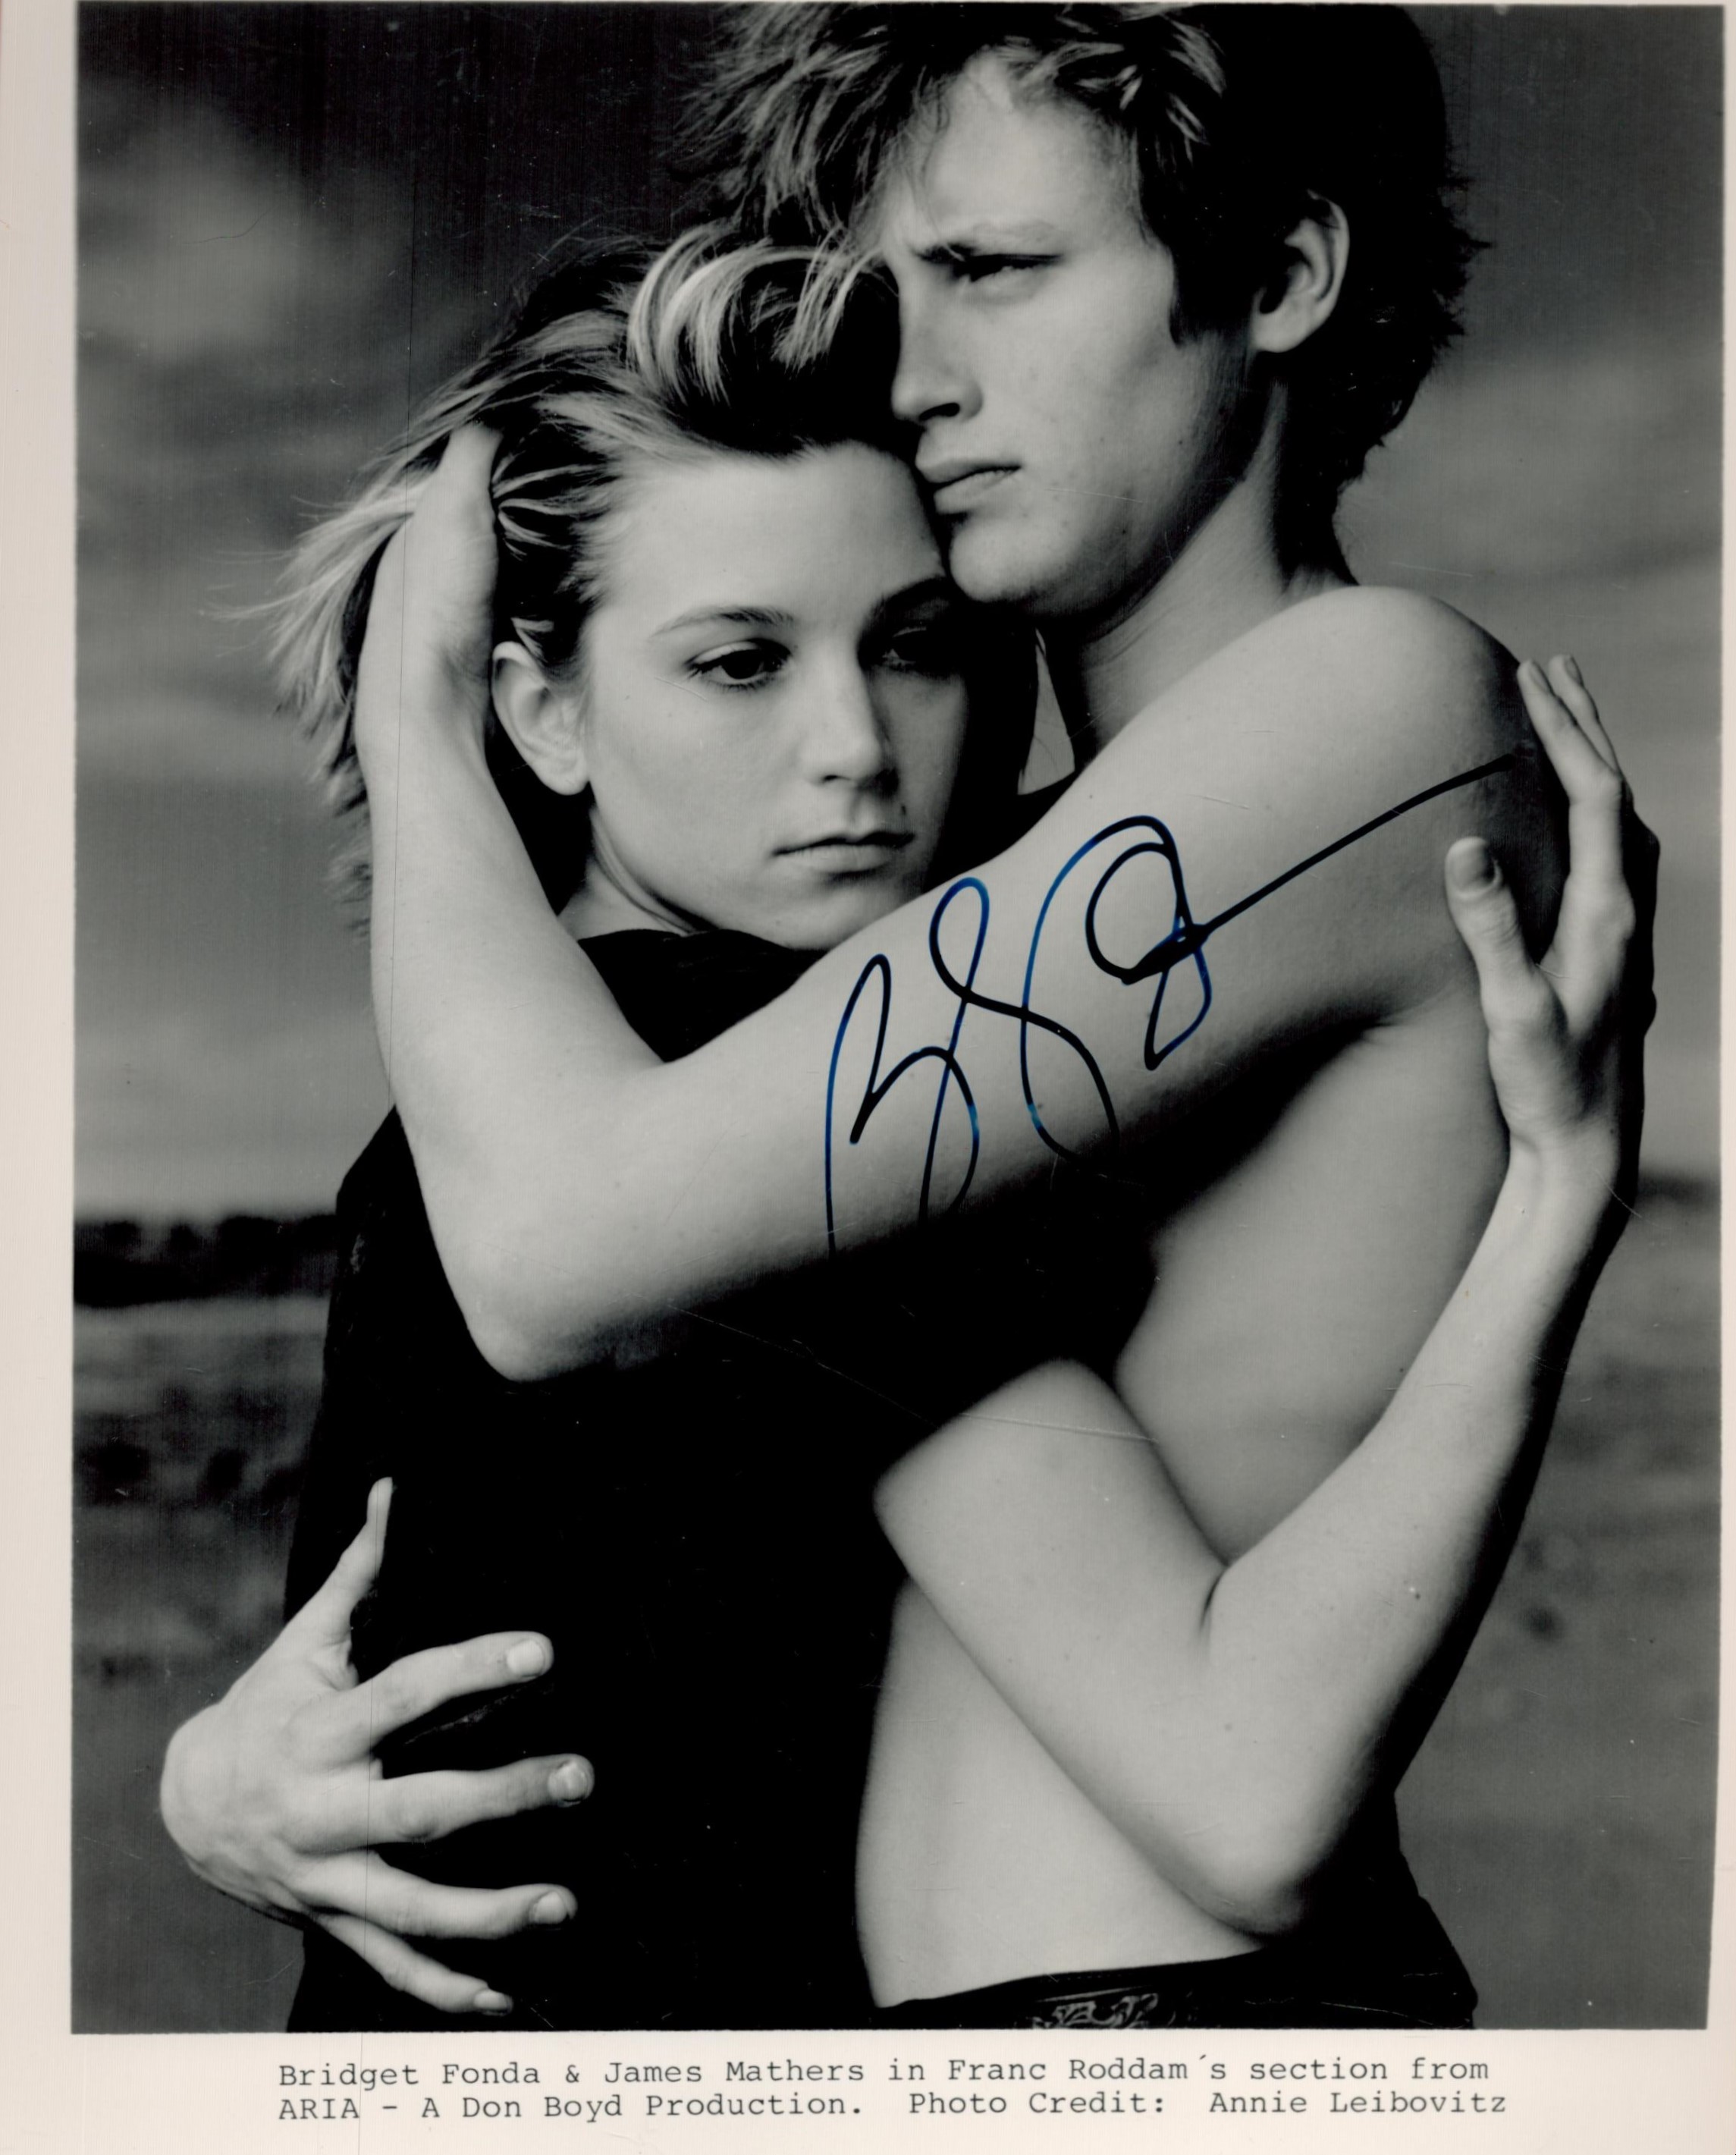 Bridget Fonda signed 10x8 black and white promo photo. All autographs come with a Certificate of